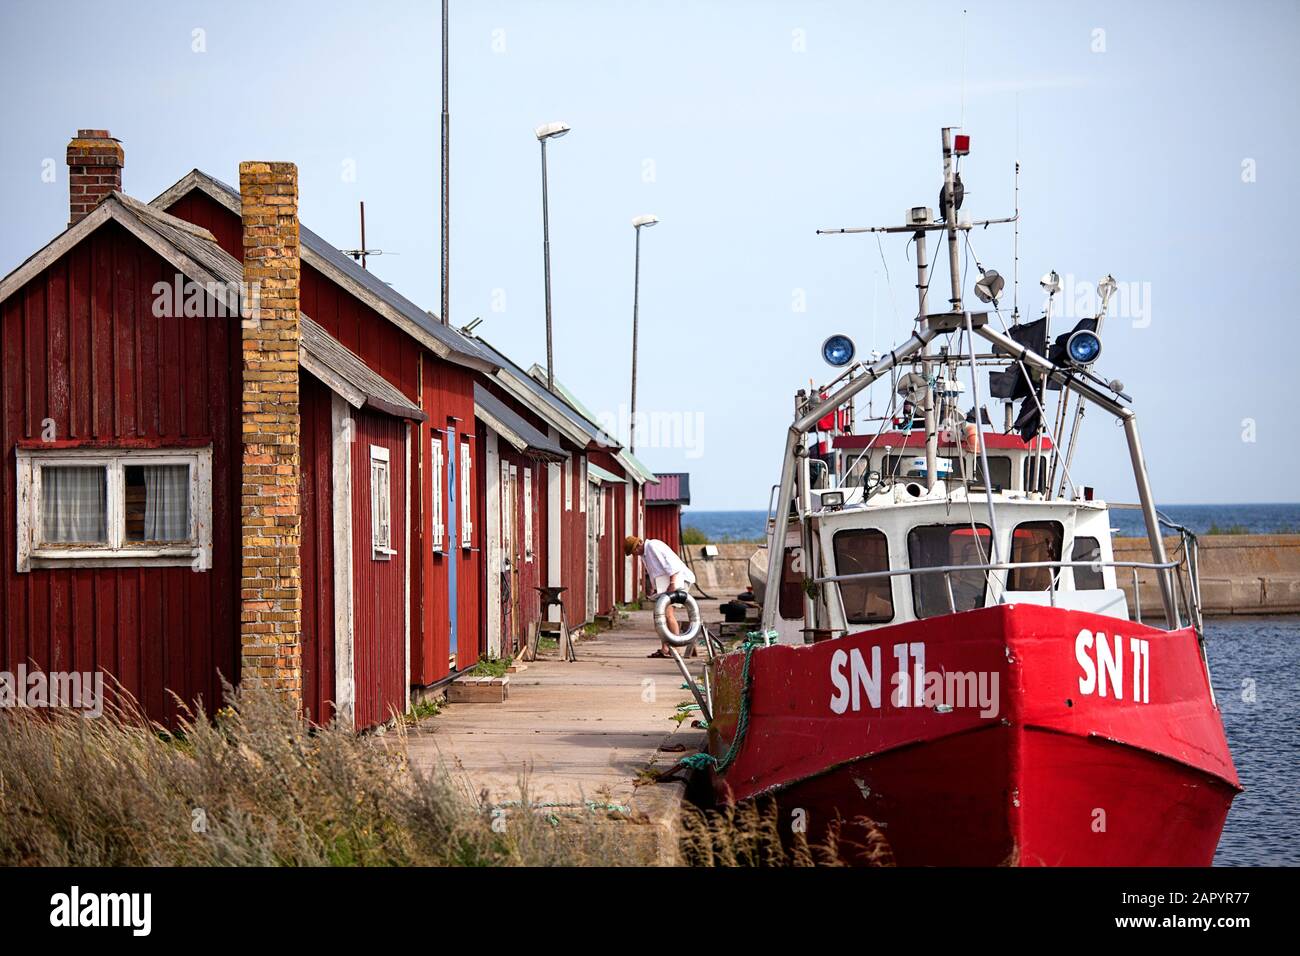 Red fishermen's cottages / rorbuer cabins and fishing boats in the small harbour of Graesgard / Gräsgård, Öland, Sweden Stock Photo